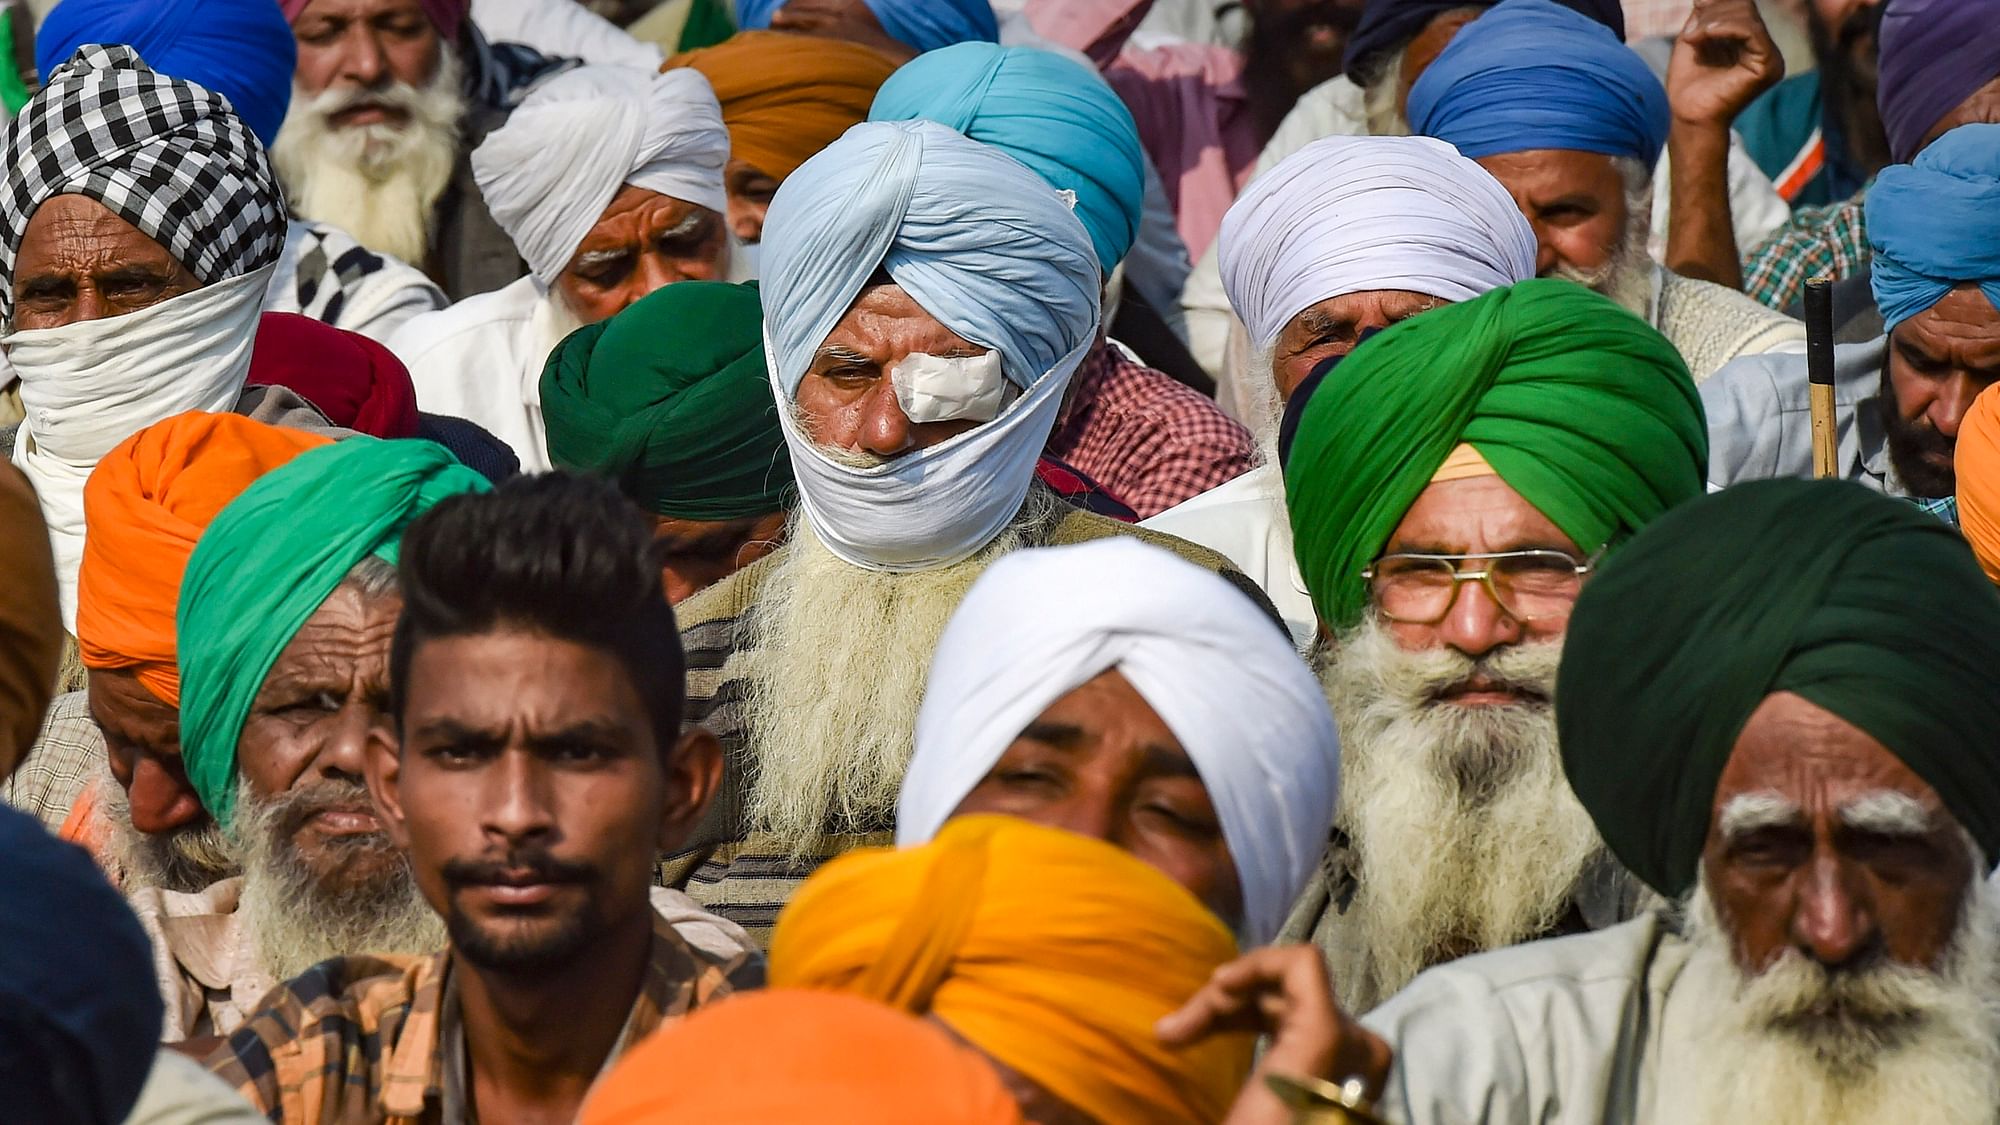  An injured farmer sits among others as they stage a protest at the Singhu border against the Centre’s new farm laws, in New Delhi, on 2 December 2020.